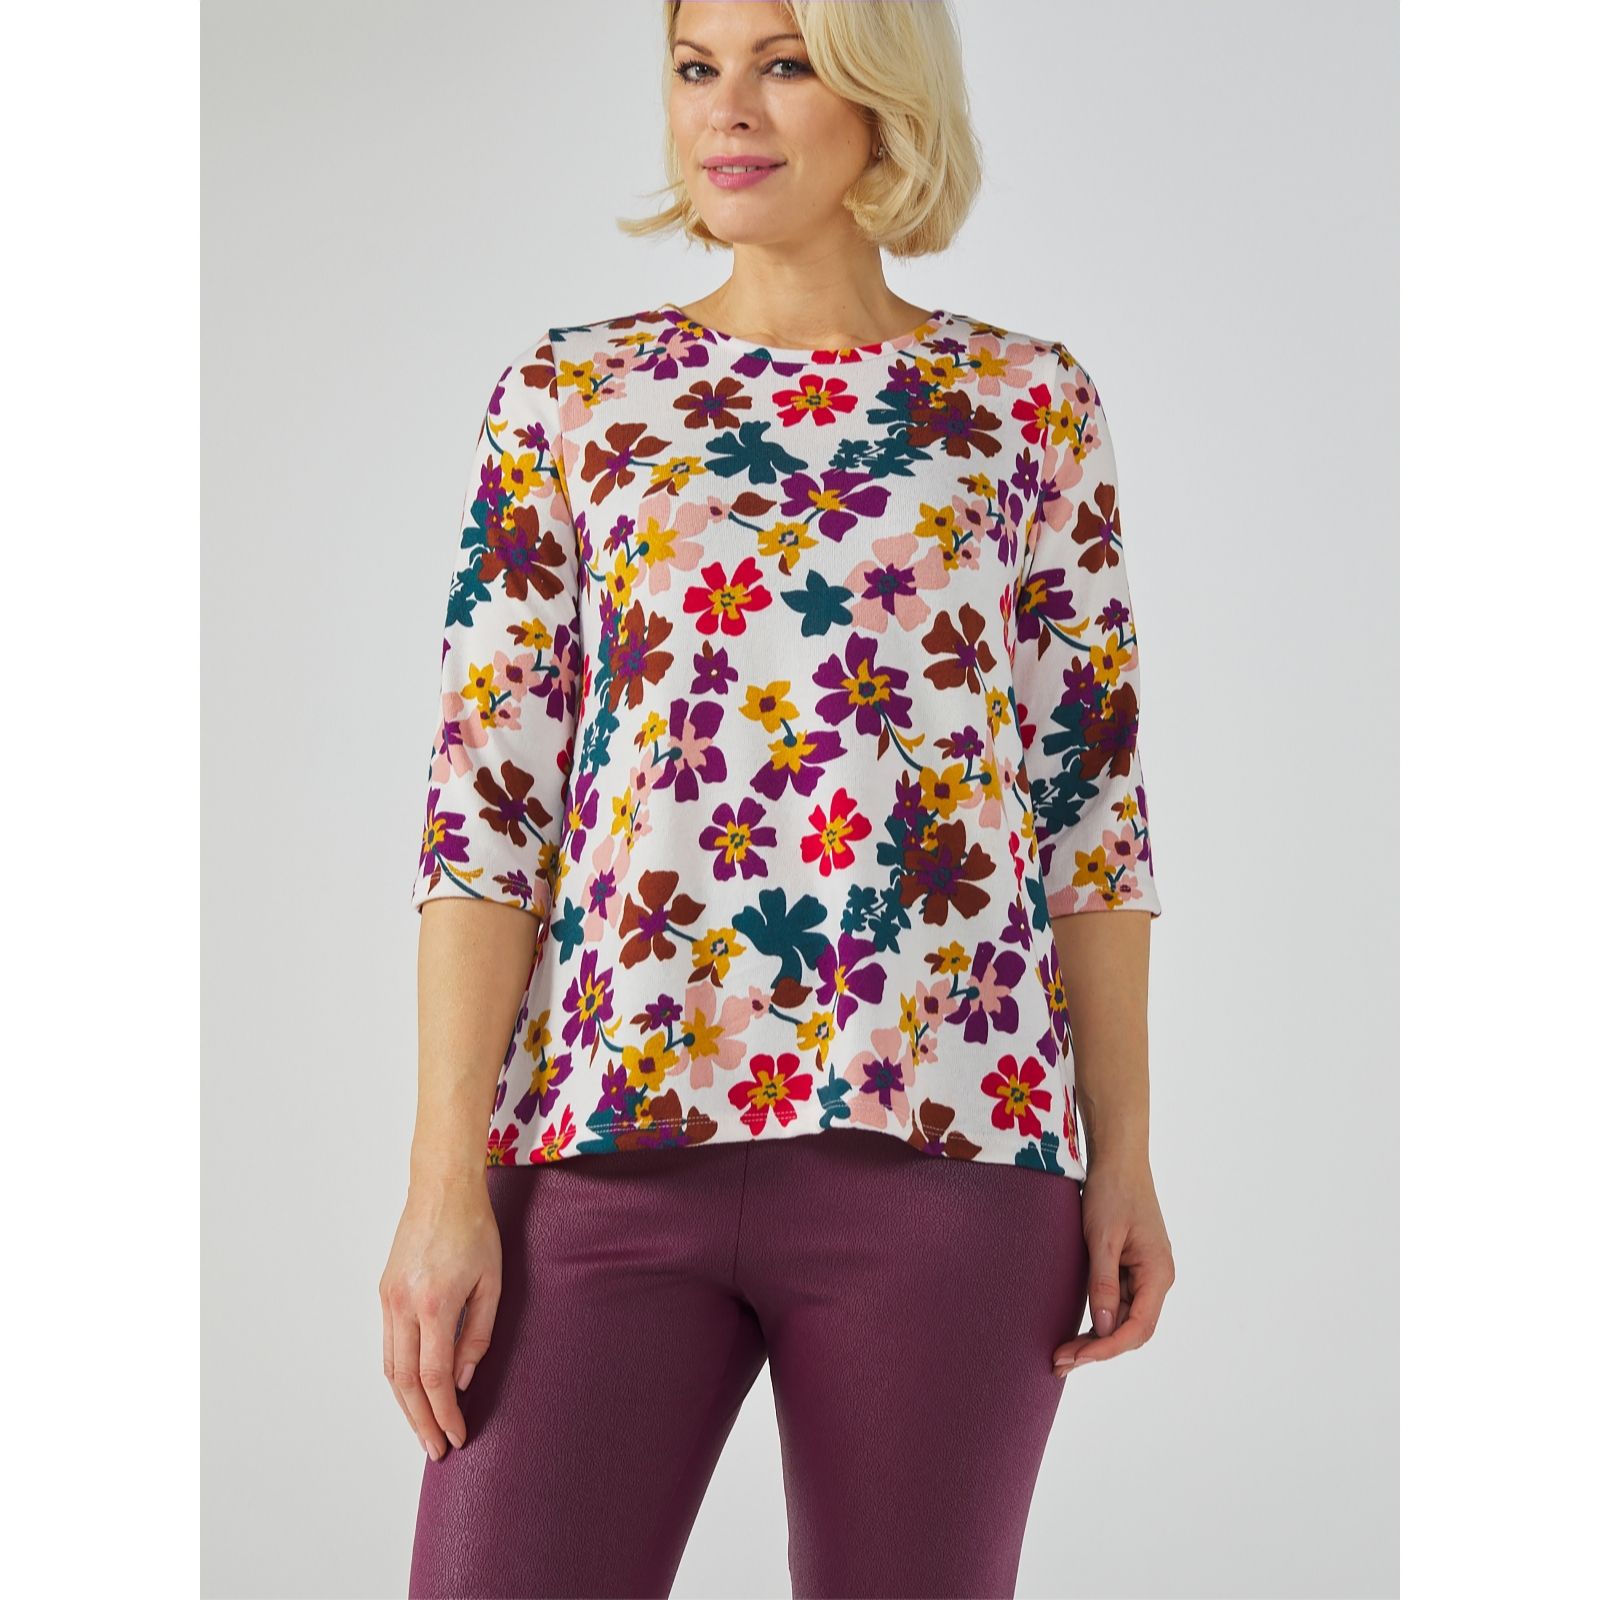 Kim & Co Printed Soft Touch Top - QVC UK